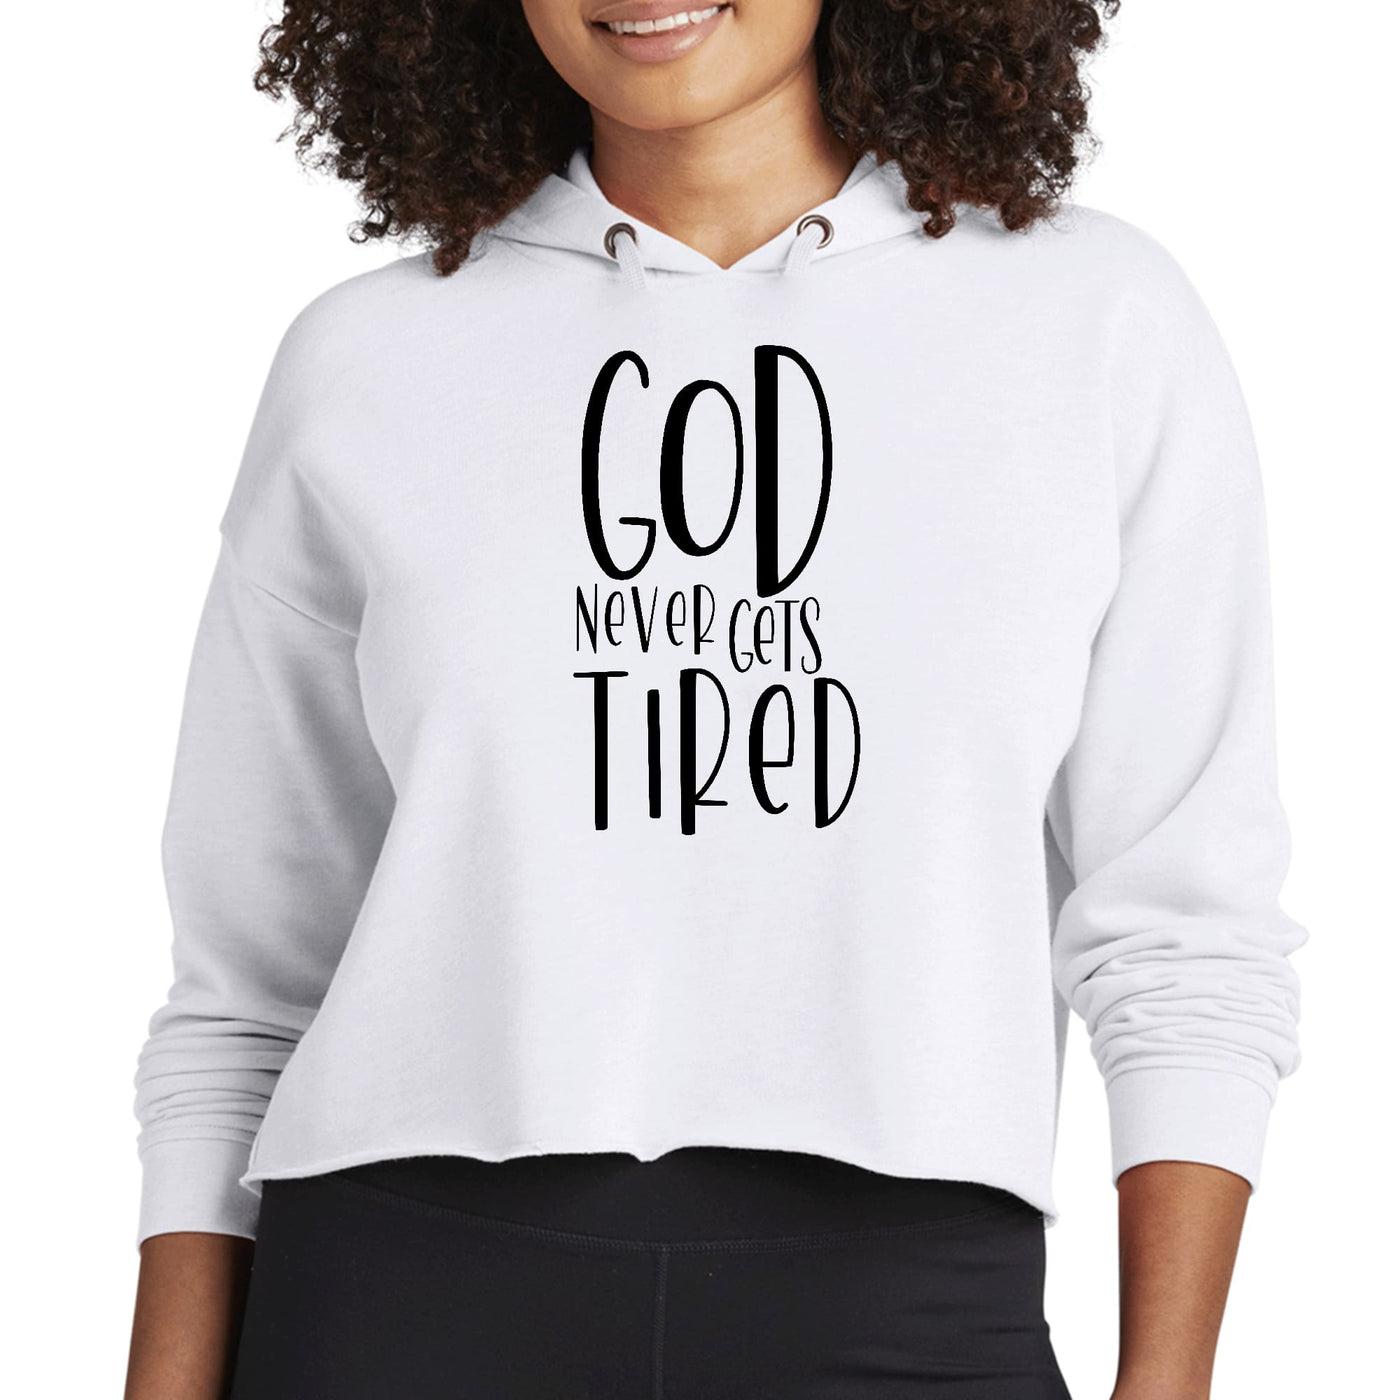 Womens Cropped Hoodie Say It Soul - God Never Gets Tired - Black - Womens